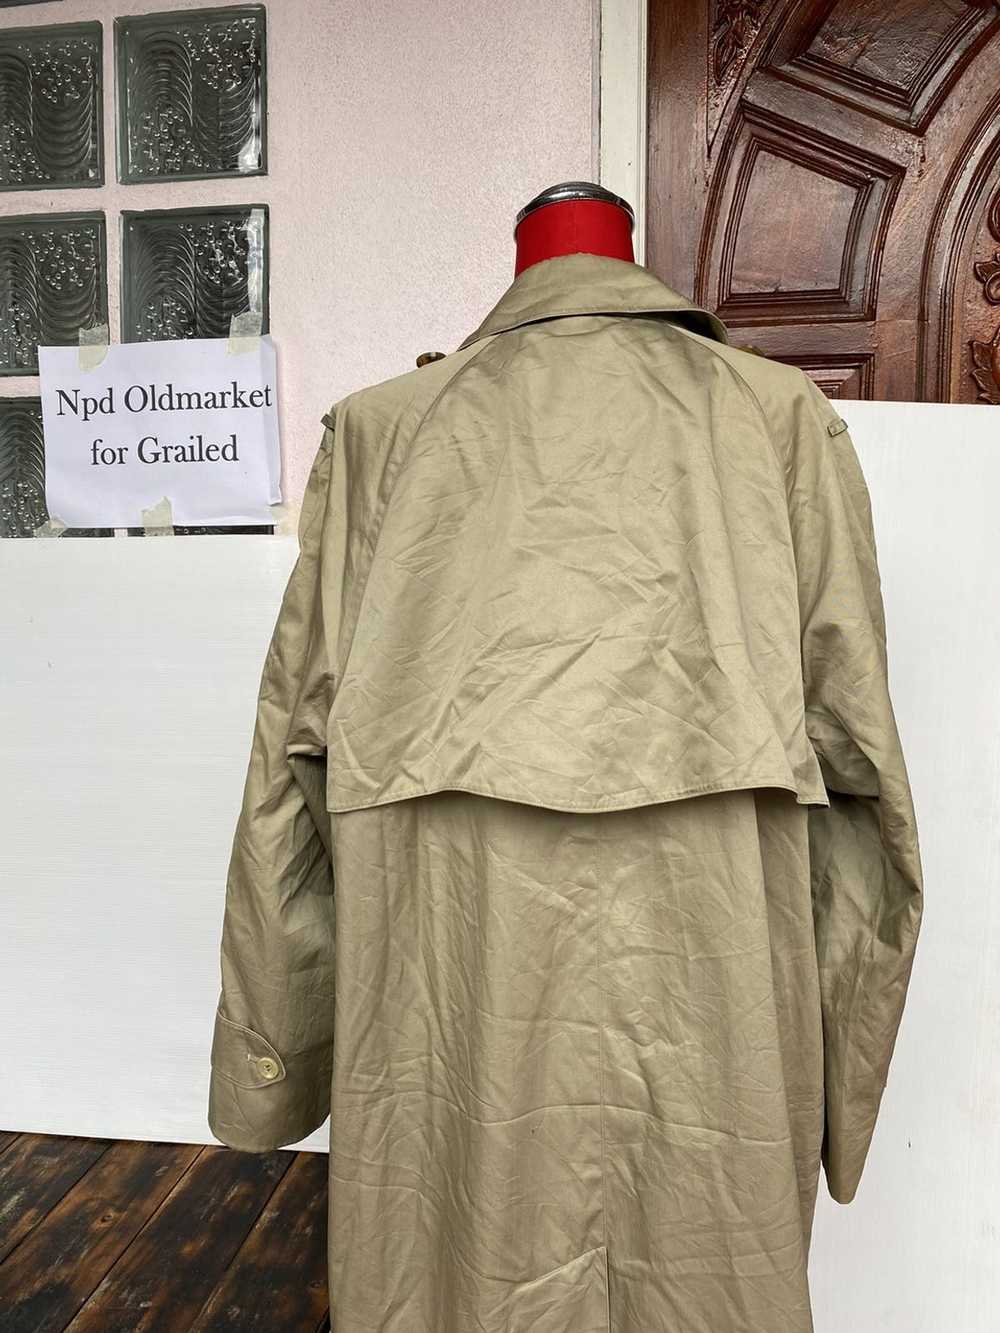 Burberry RARE VINTAGE BURBERRY TRENCH COAT - image 10